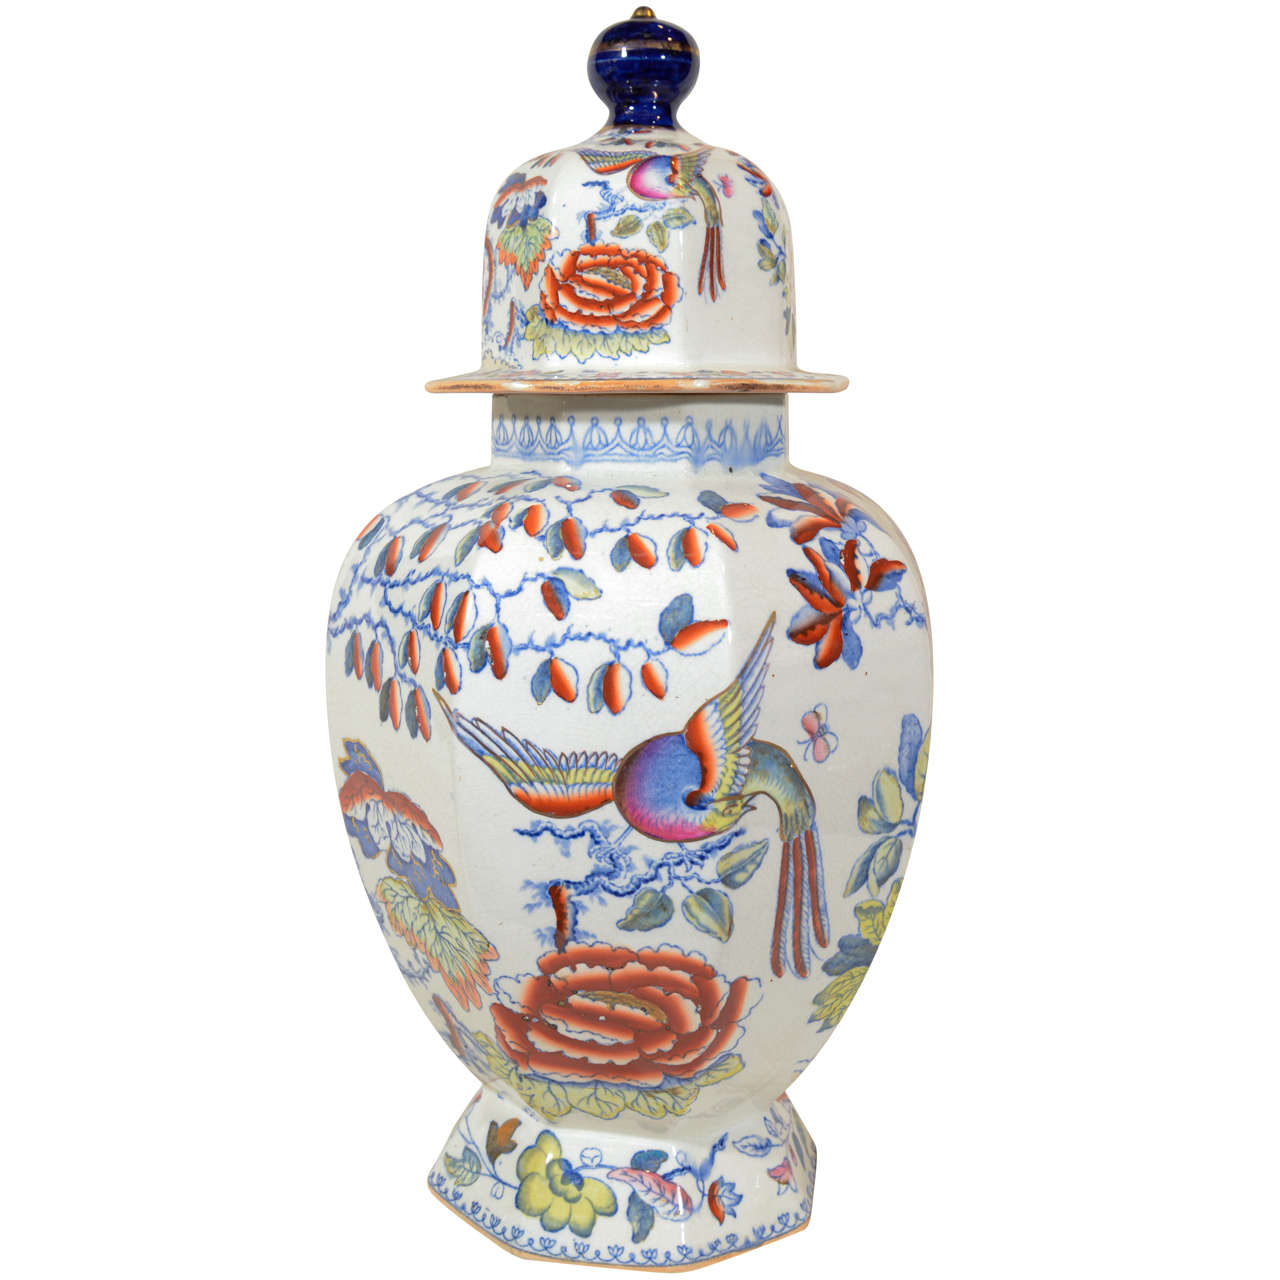 Large Mason's Ironstone Covered Vase Painted in the "Flying Bird" Pattern